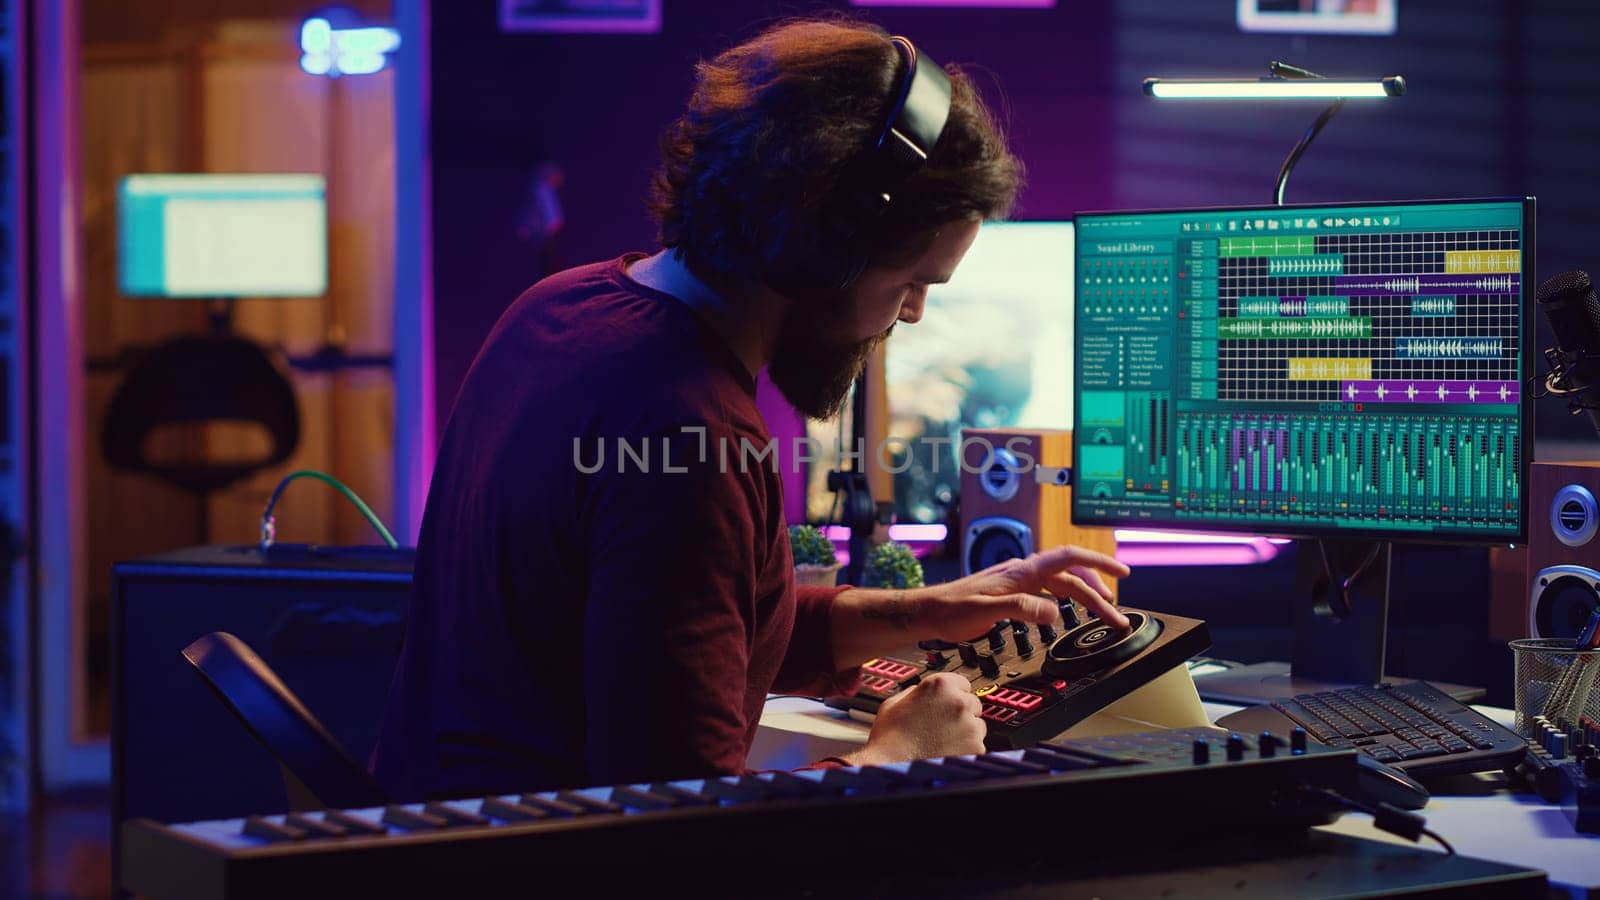 Music engineer using usb stick to edit and add sound effects on audio recording by DCStudio